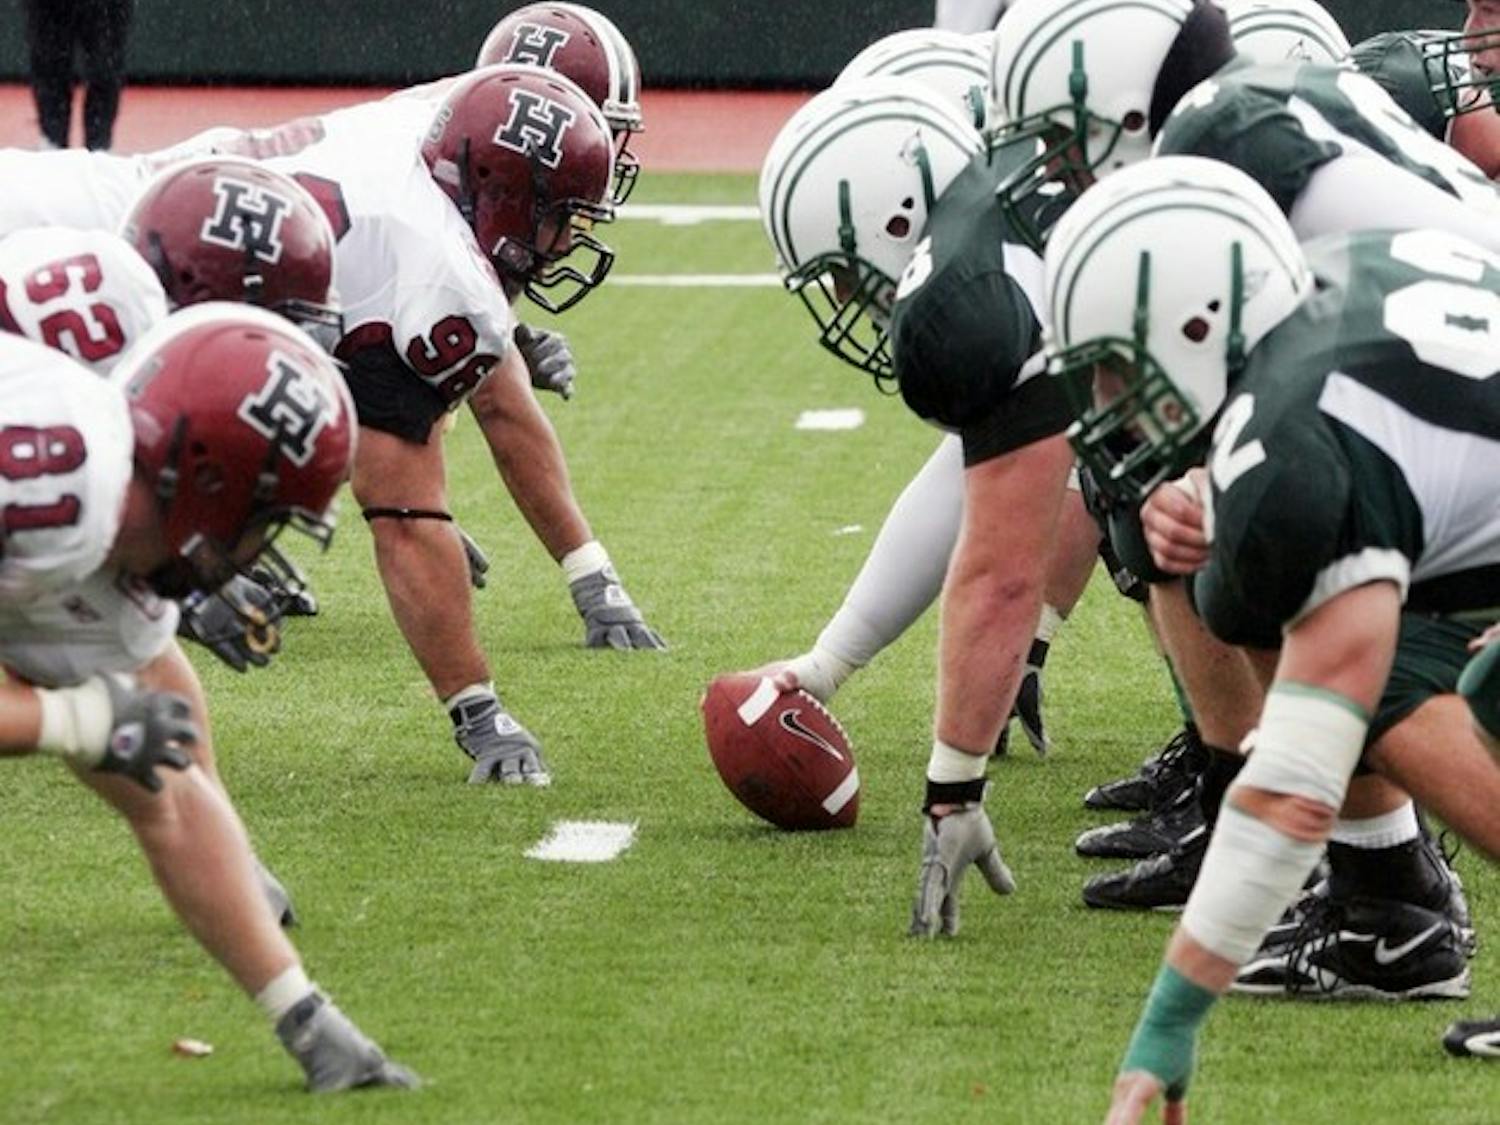 The Big Green struggled all afternoon to crack Harvard's stalwart defense, falling convincingly to the Crimson, 28-0.